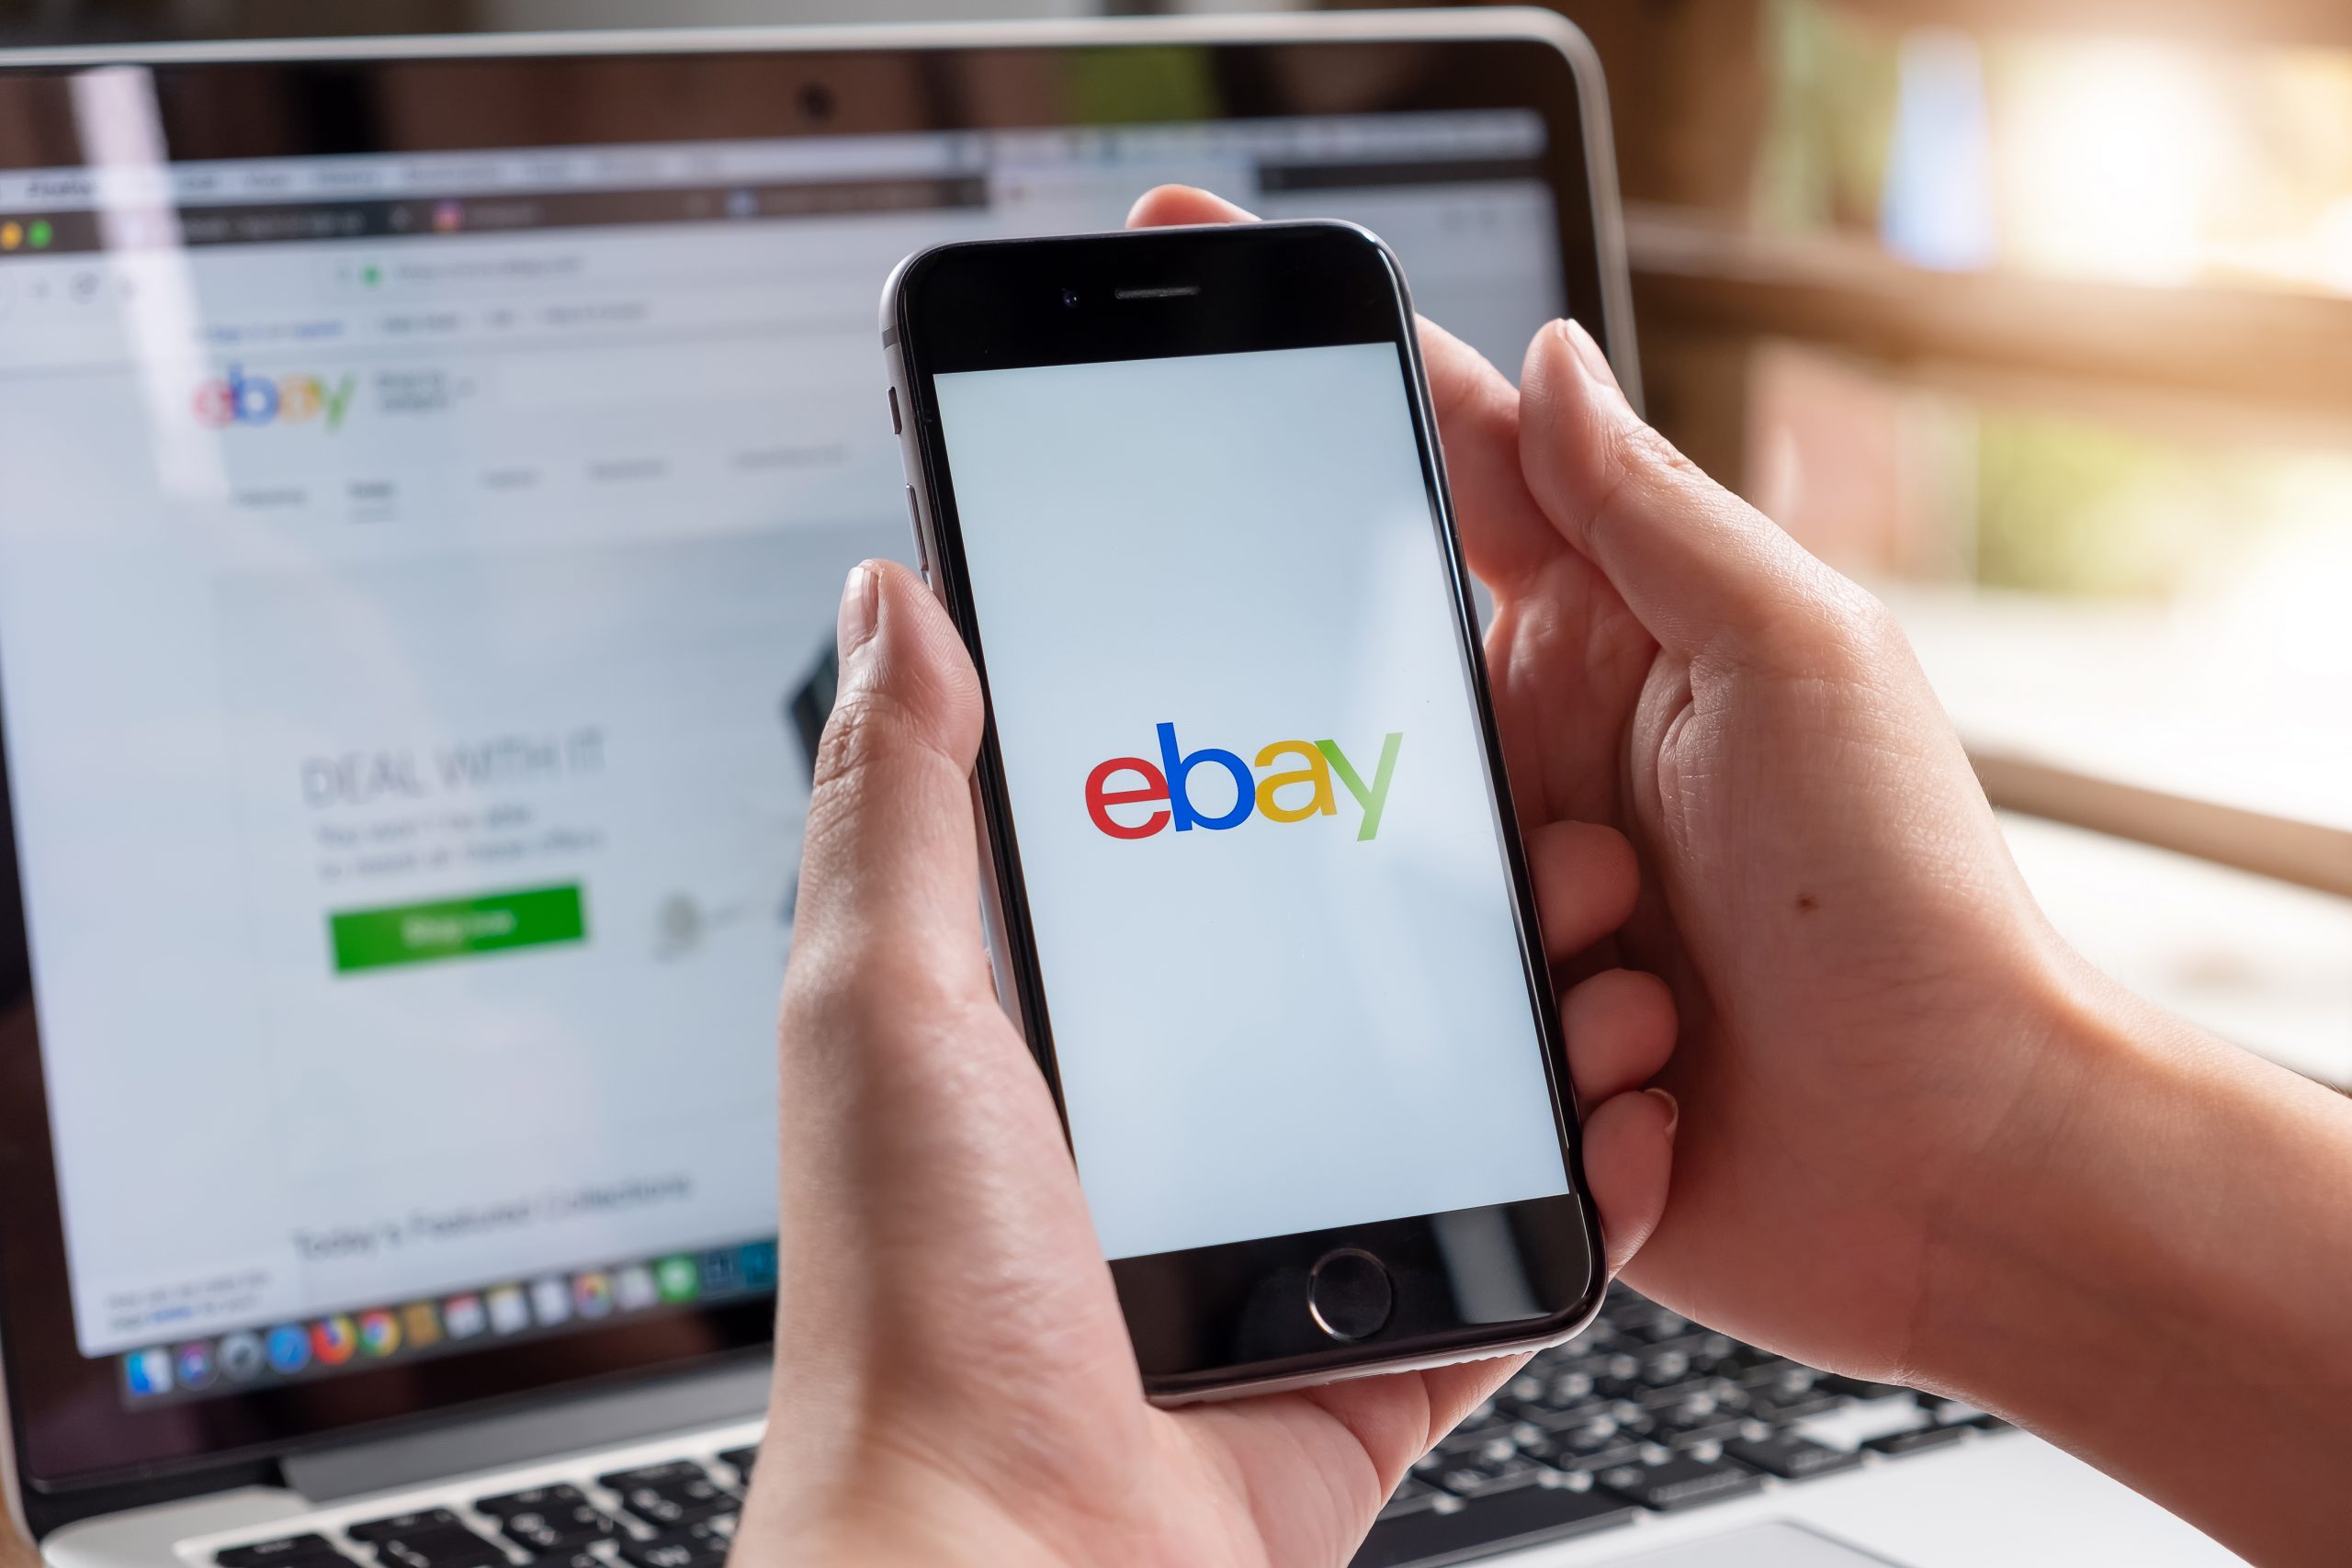 How to sell on eBay?